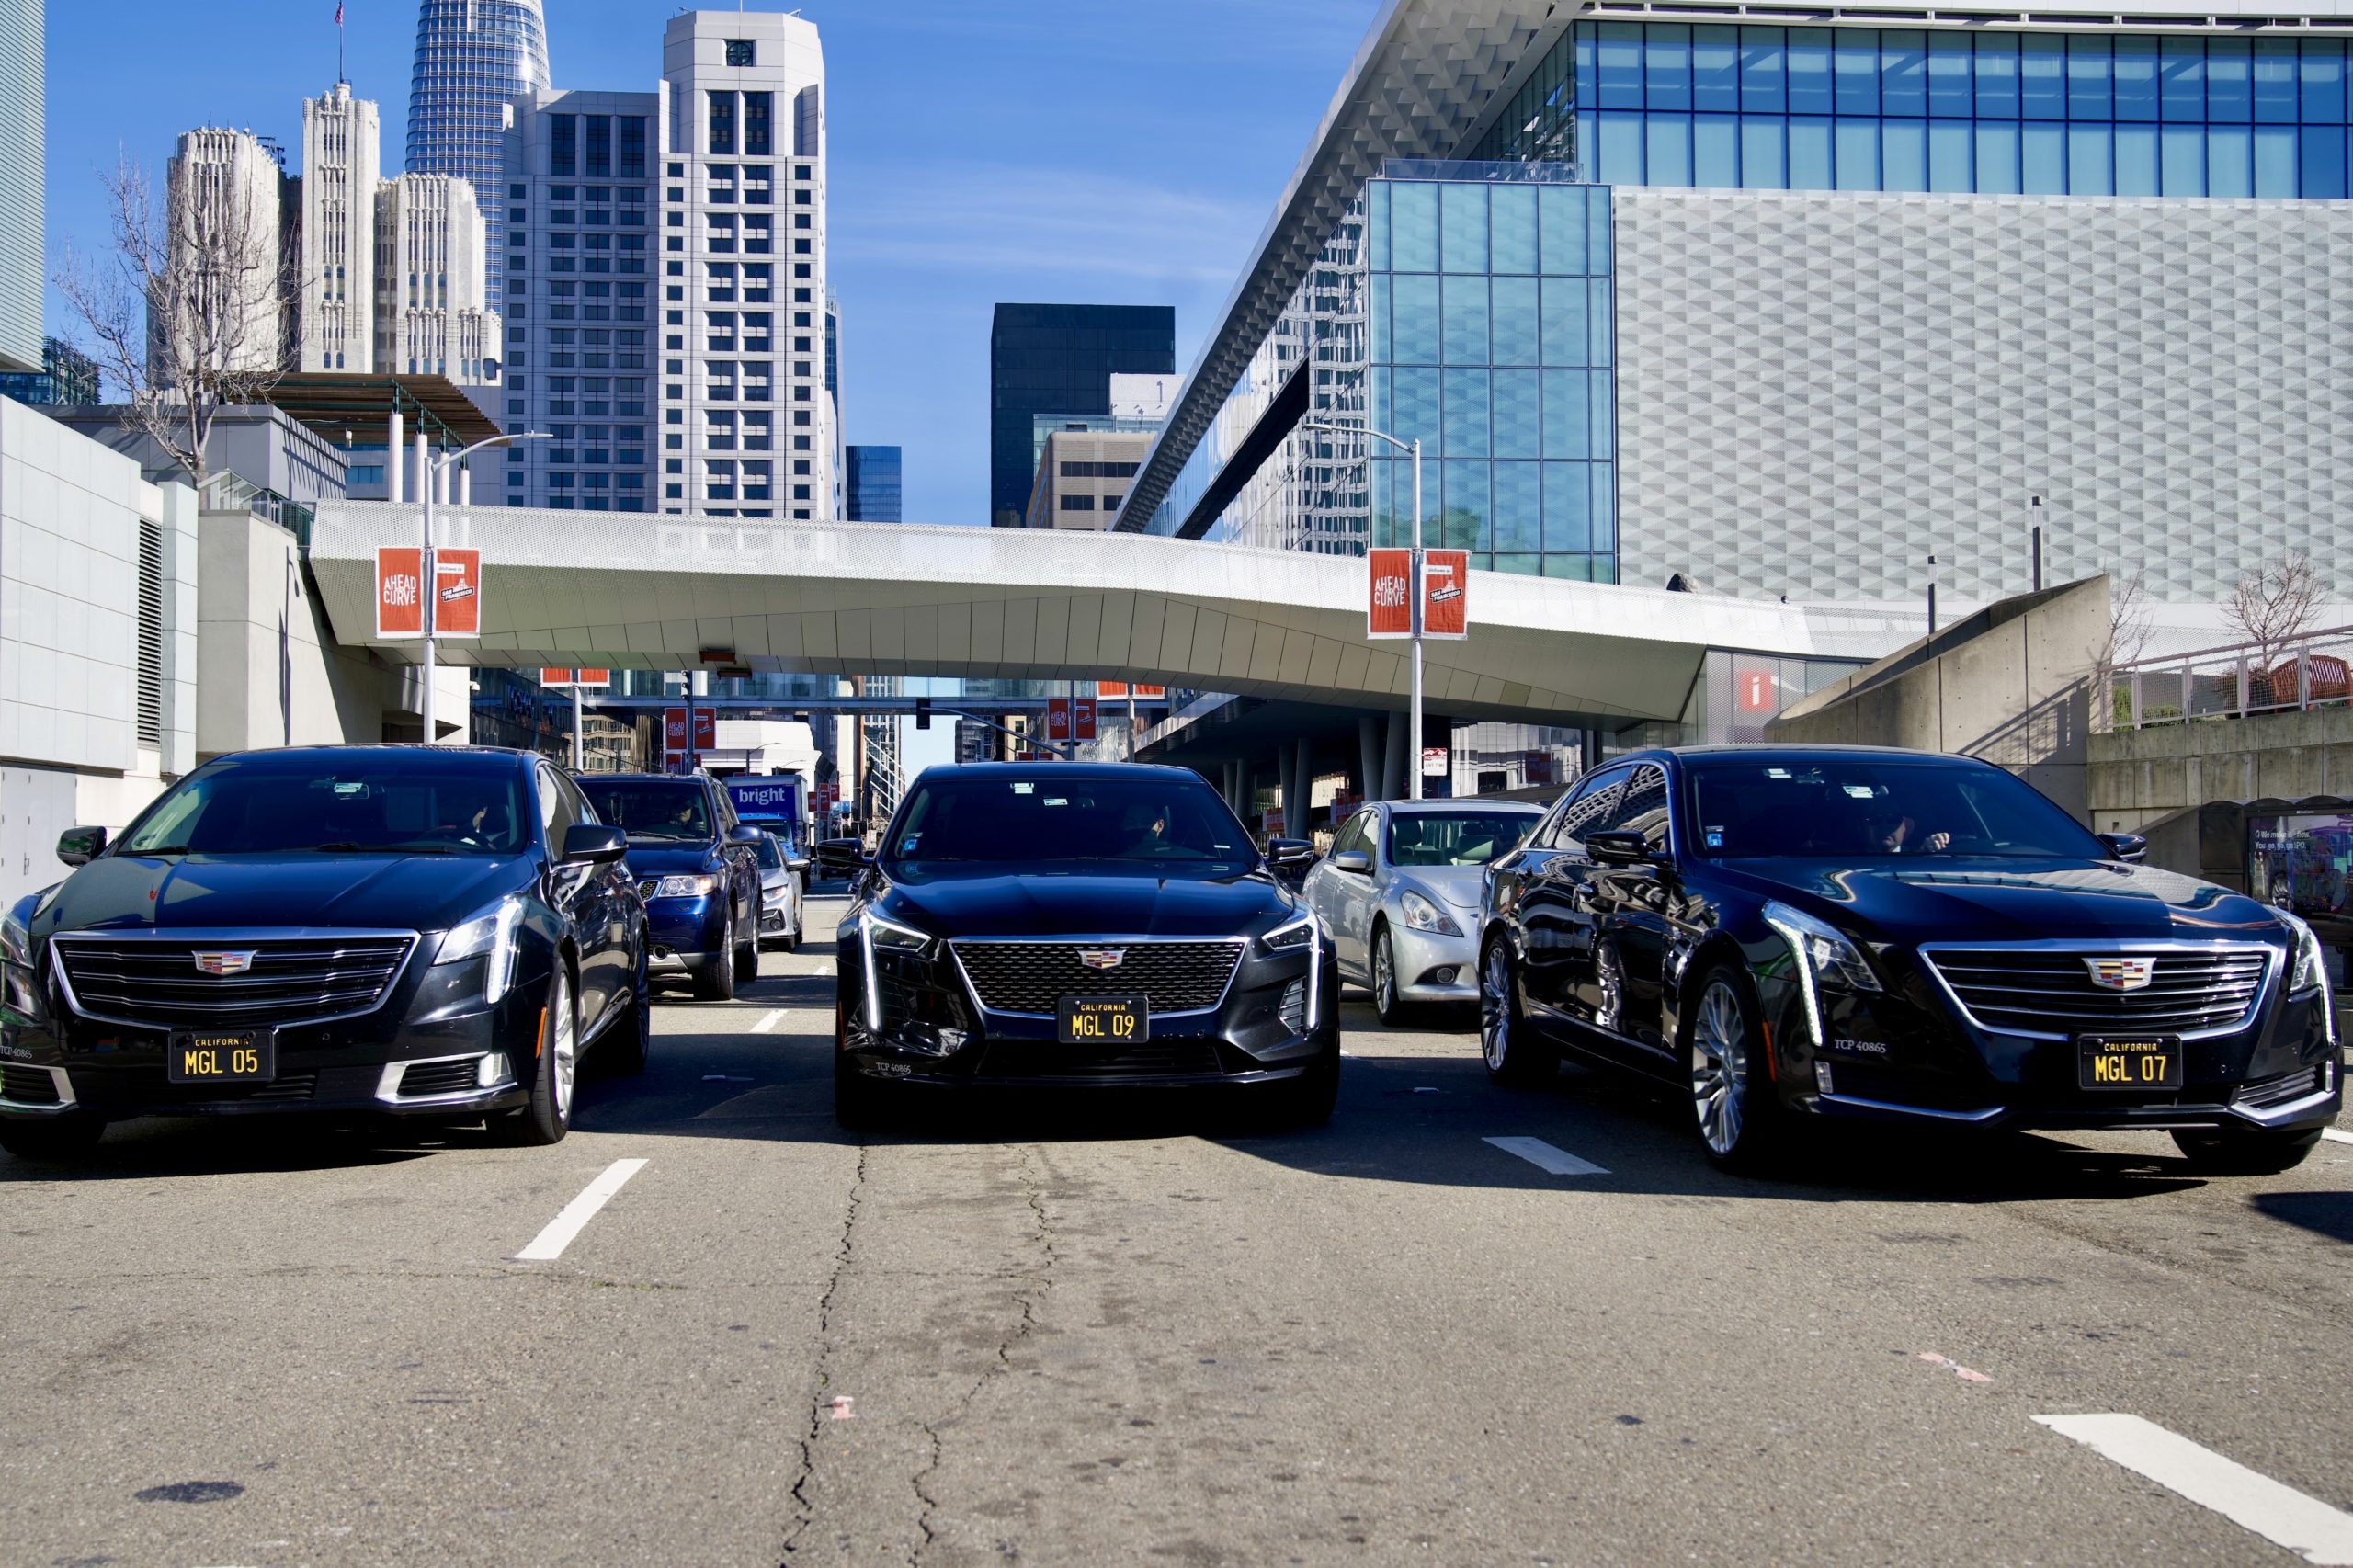 Experience Luxury with Our San Francisco Limousine Service - MGL Limo